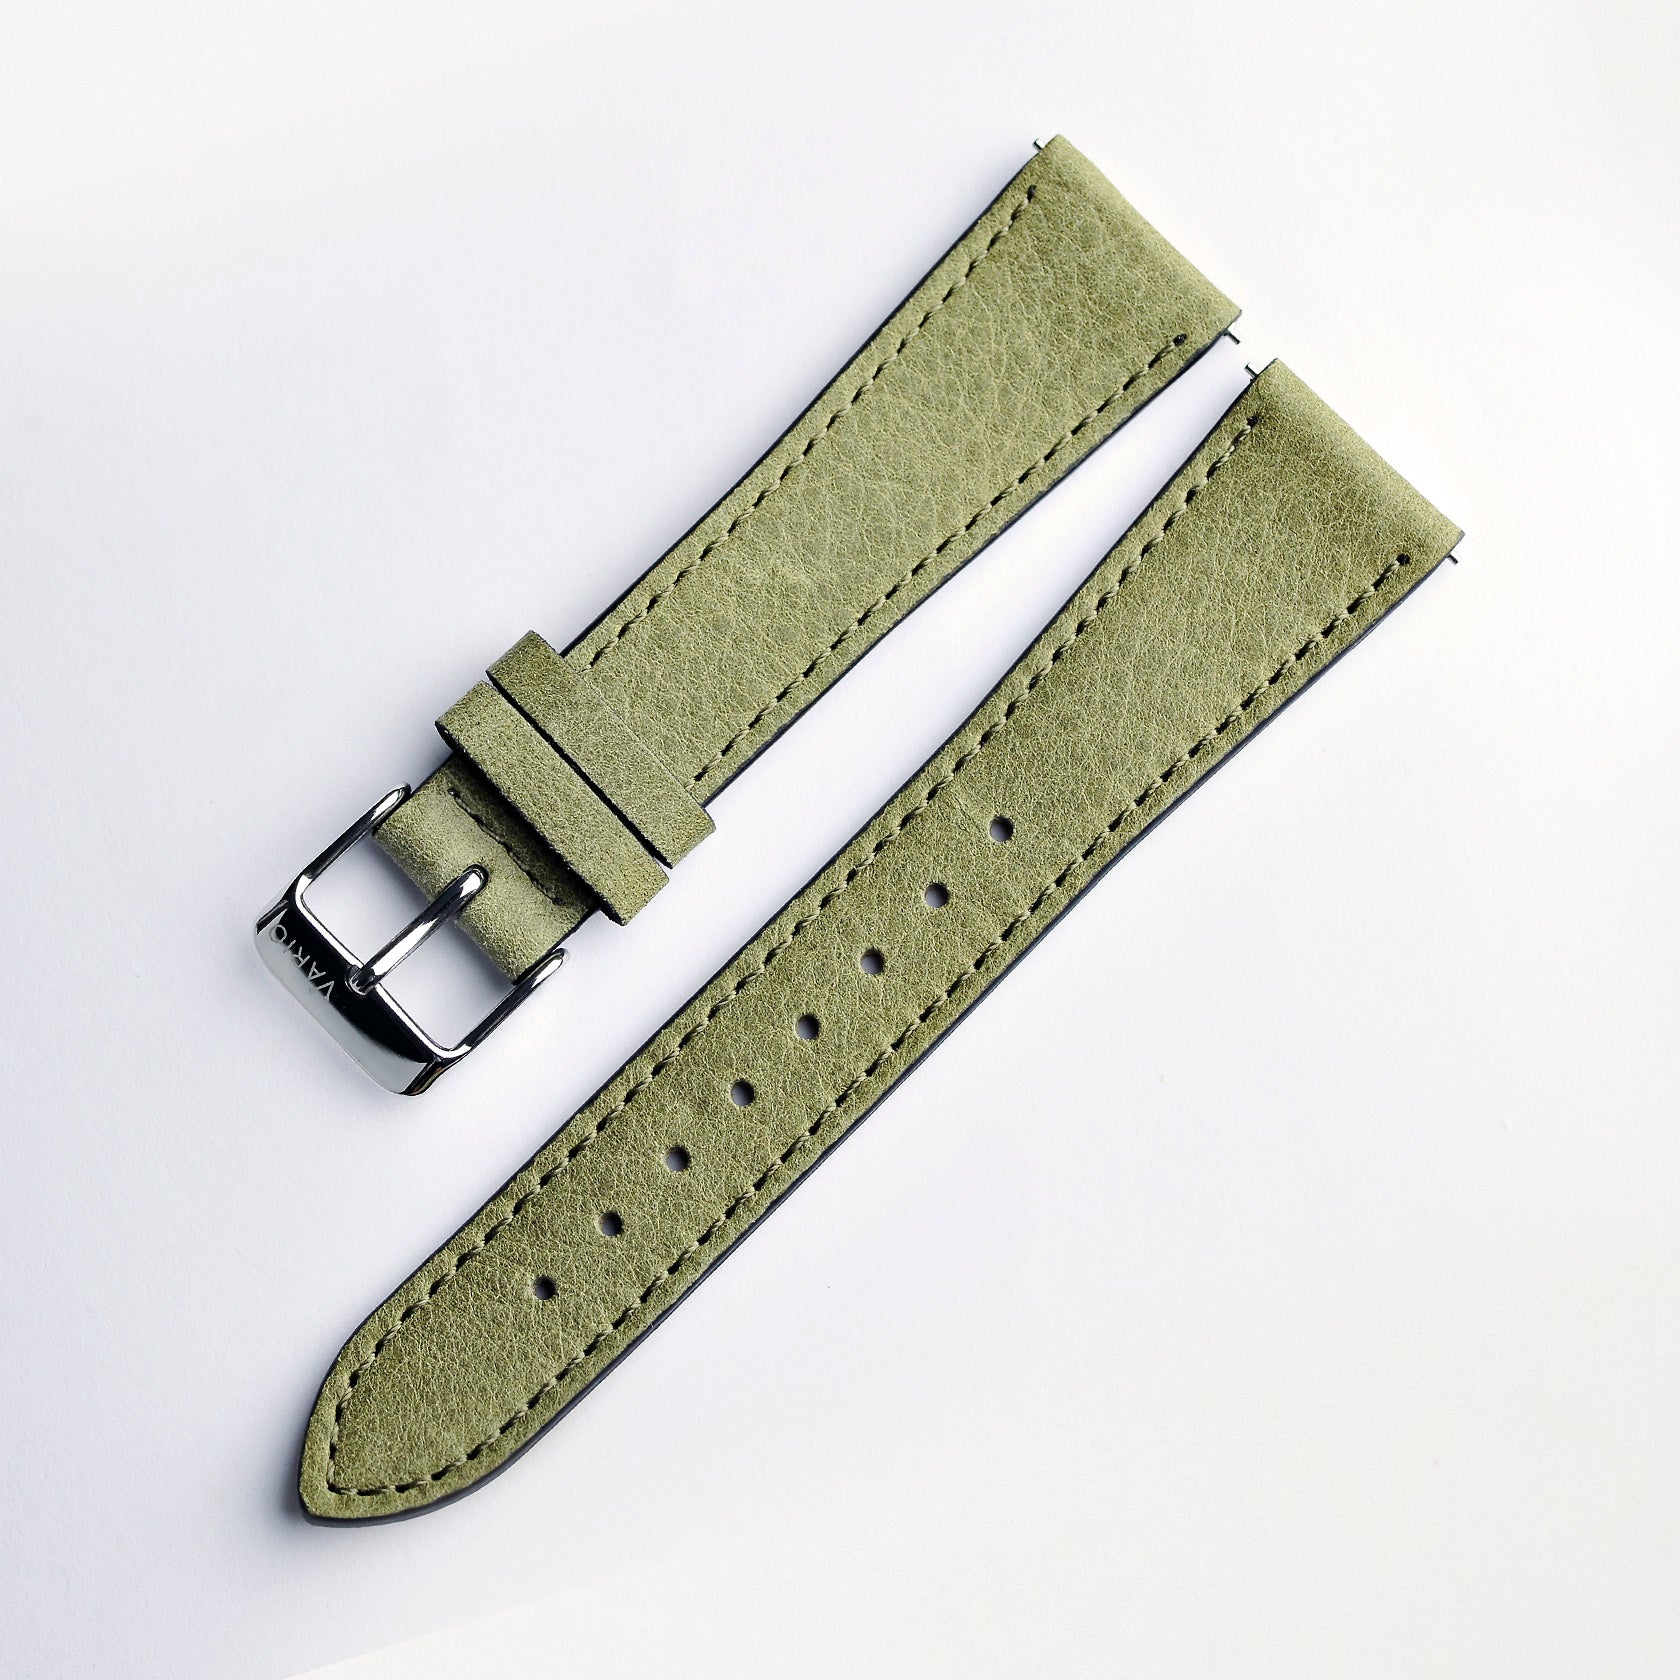 vario natural grain german leather with quick release watch strap